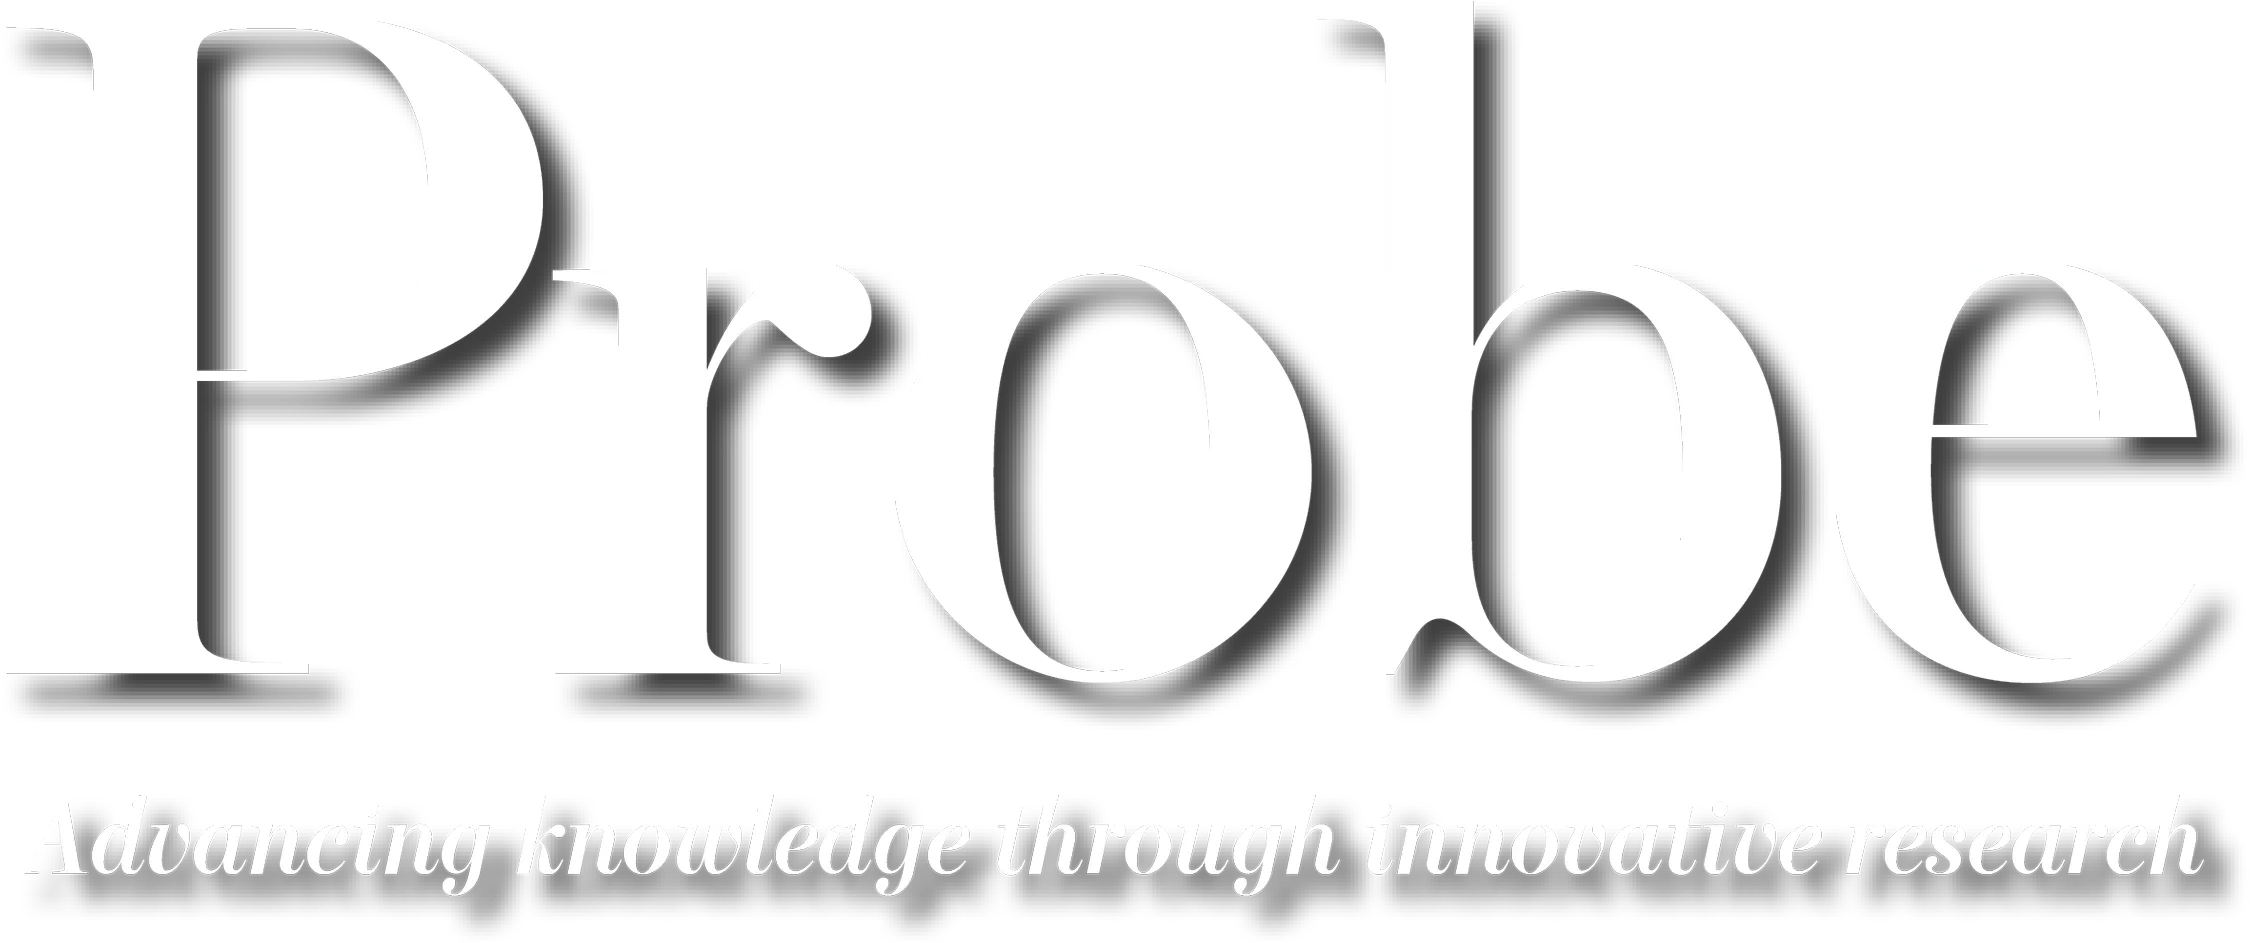 Probe: Advancing knowledge through innovative research heading